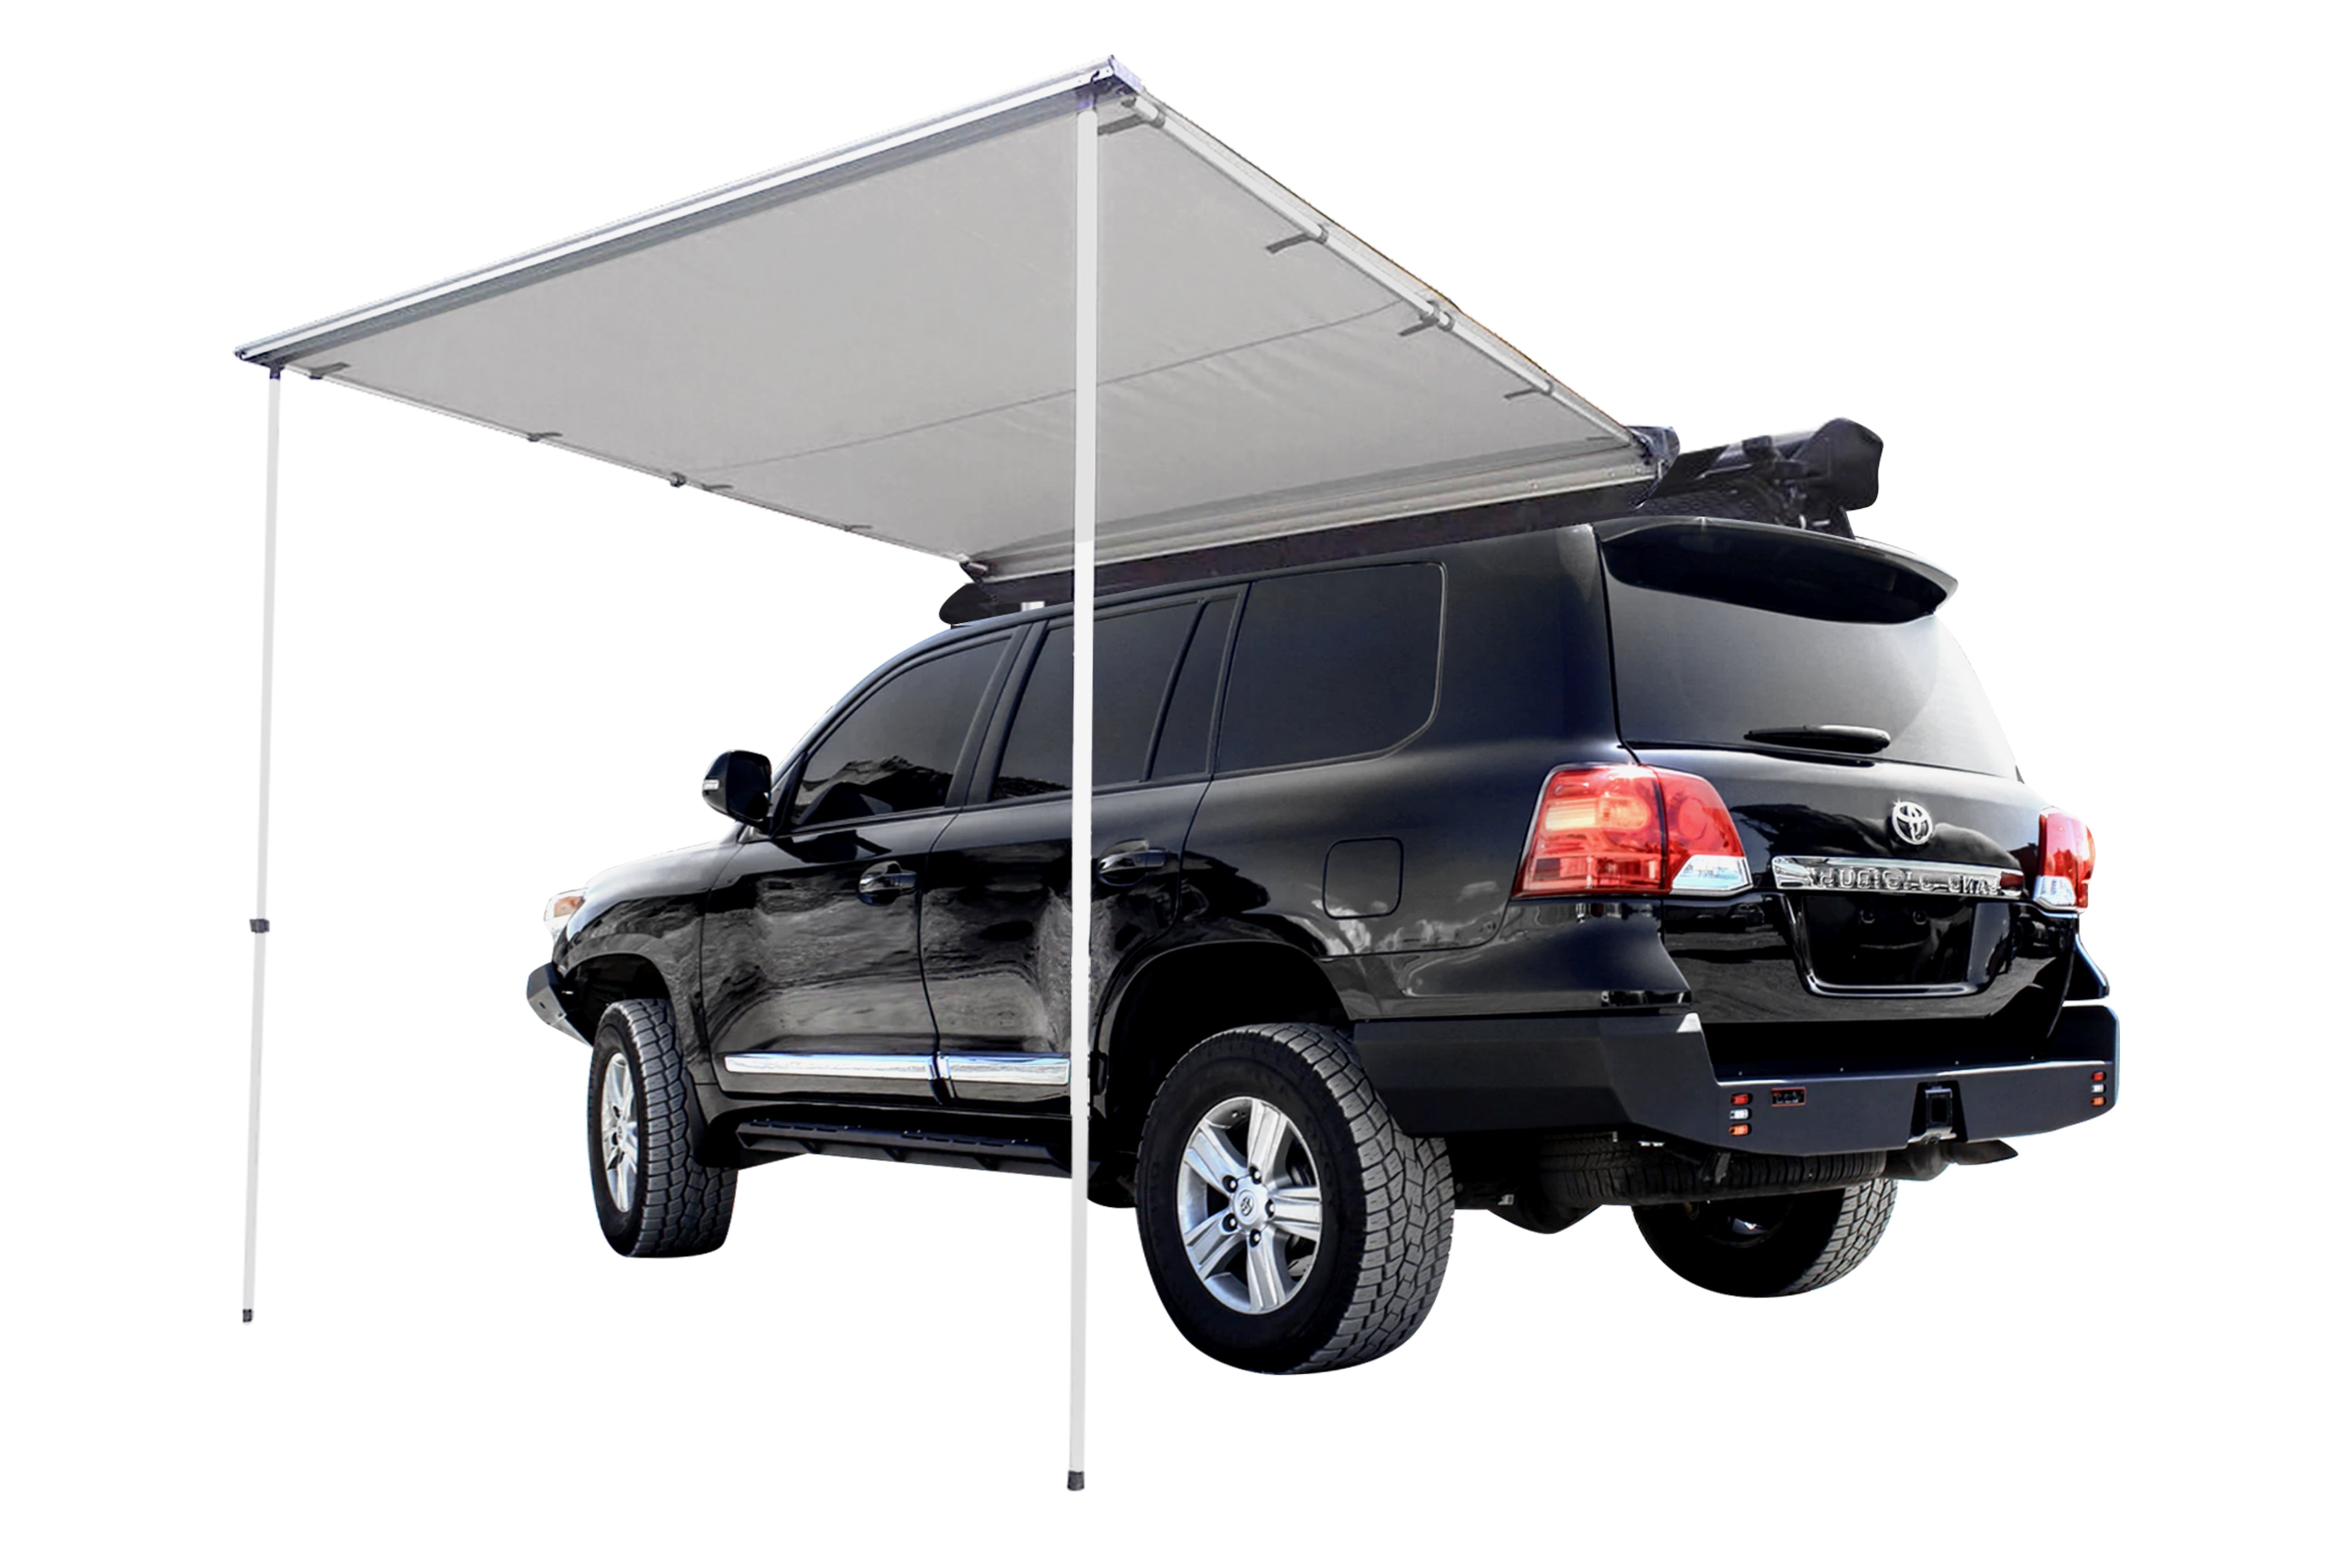 FRONTIER 250 DLX 4WD AWNING 2.5 x 2.5m 600d CANVAS